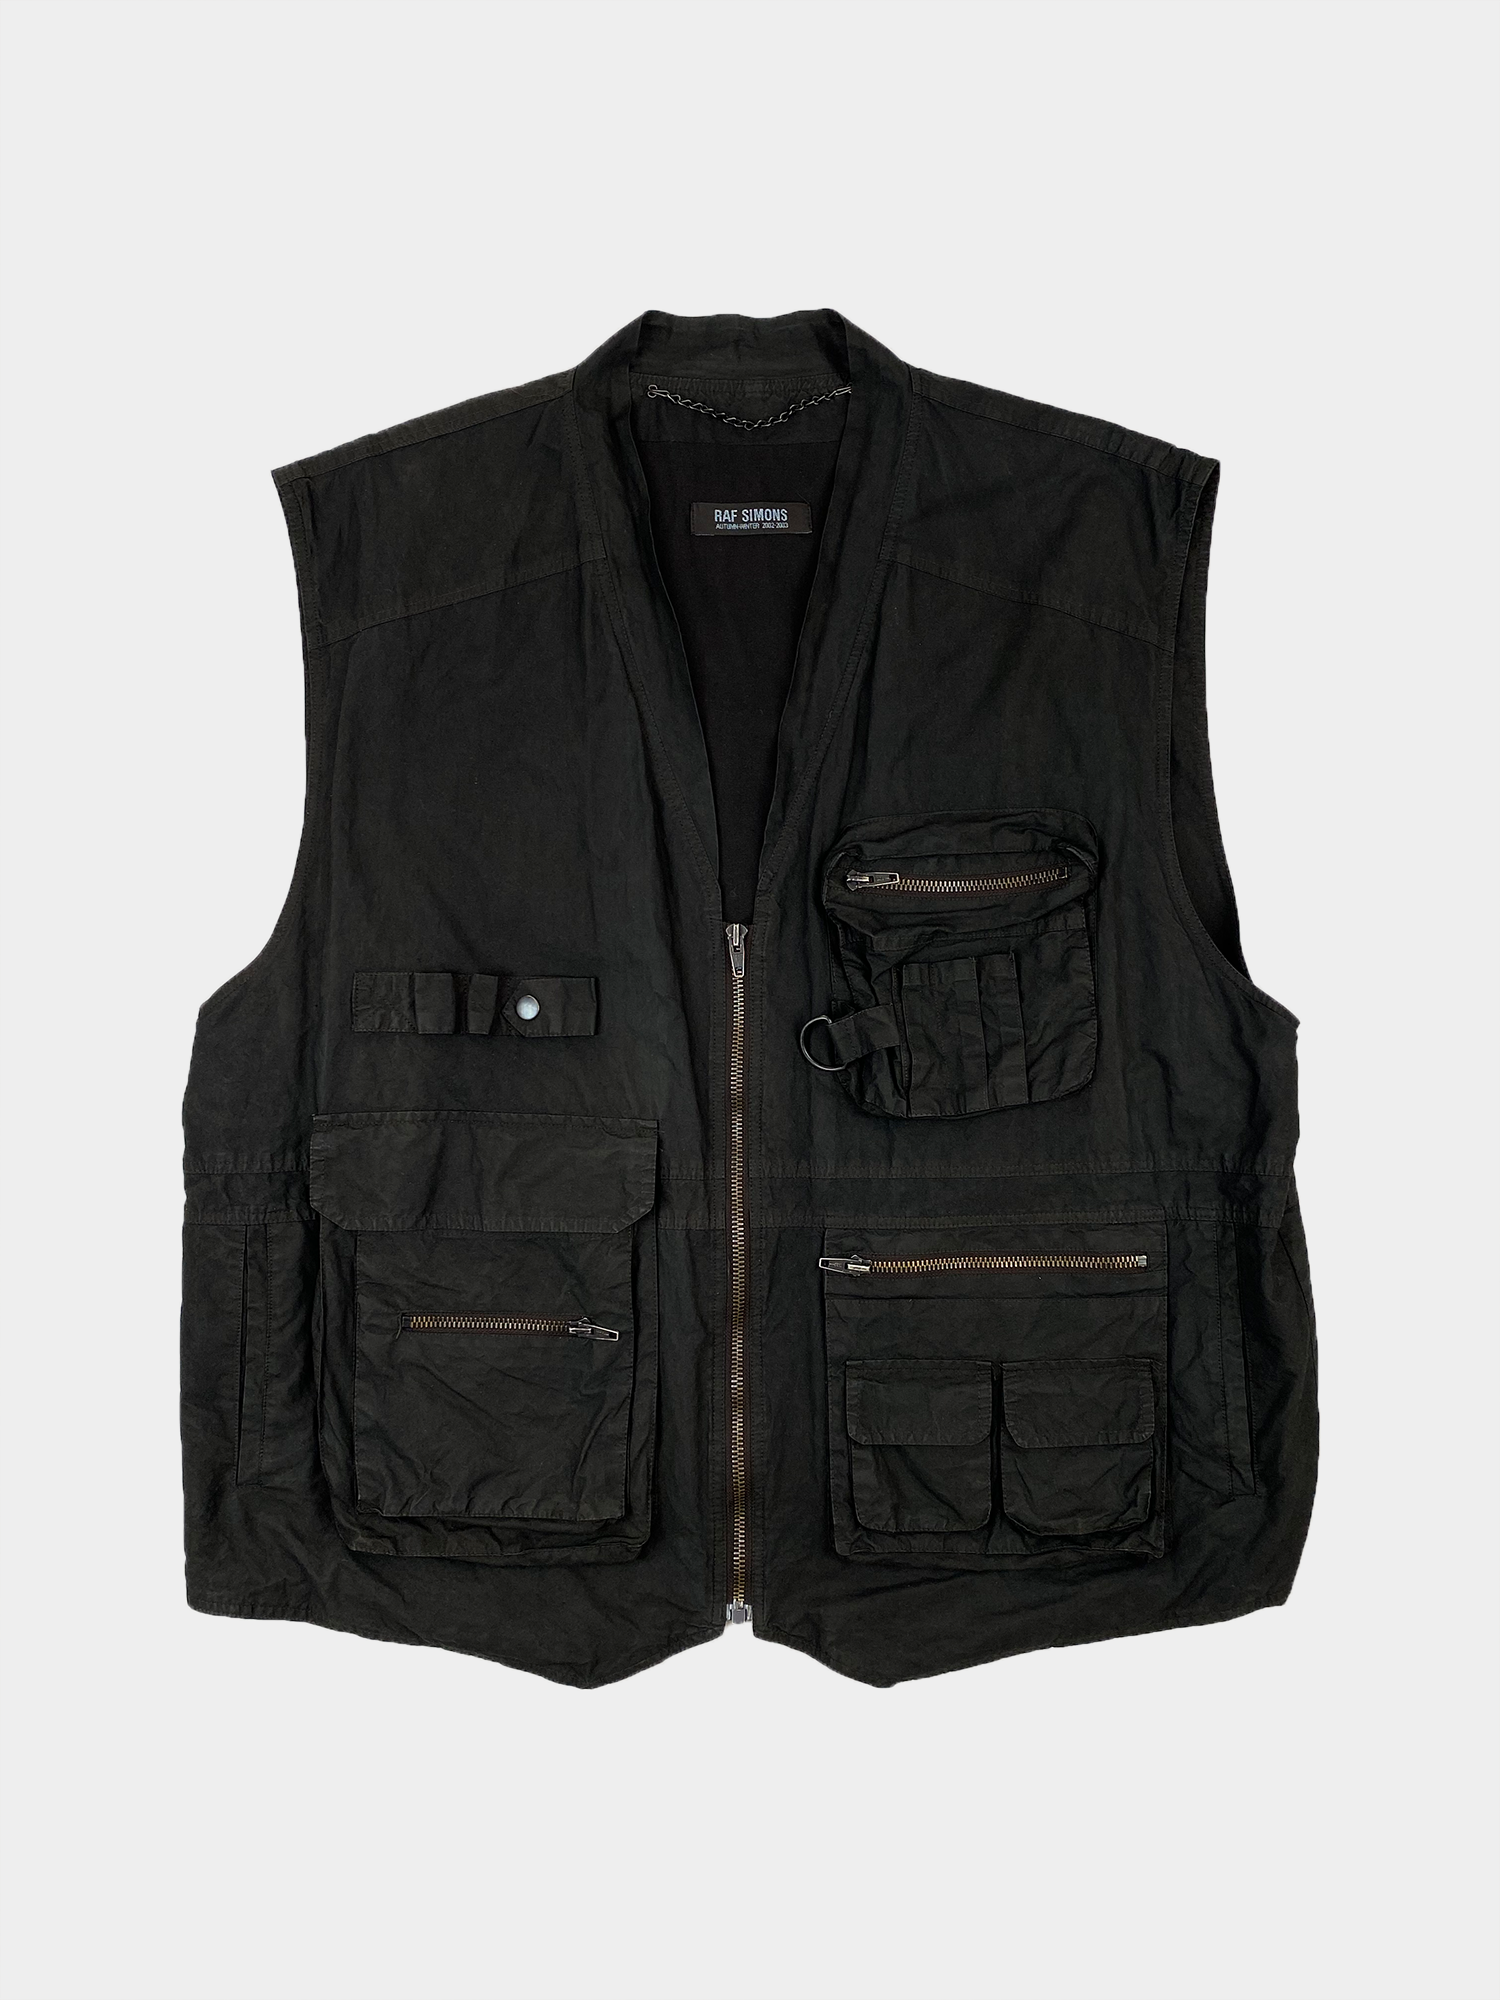 RAF SIMONS A/W02 Virginia Creeper Vest - ARCHIVED